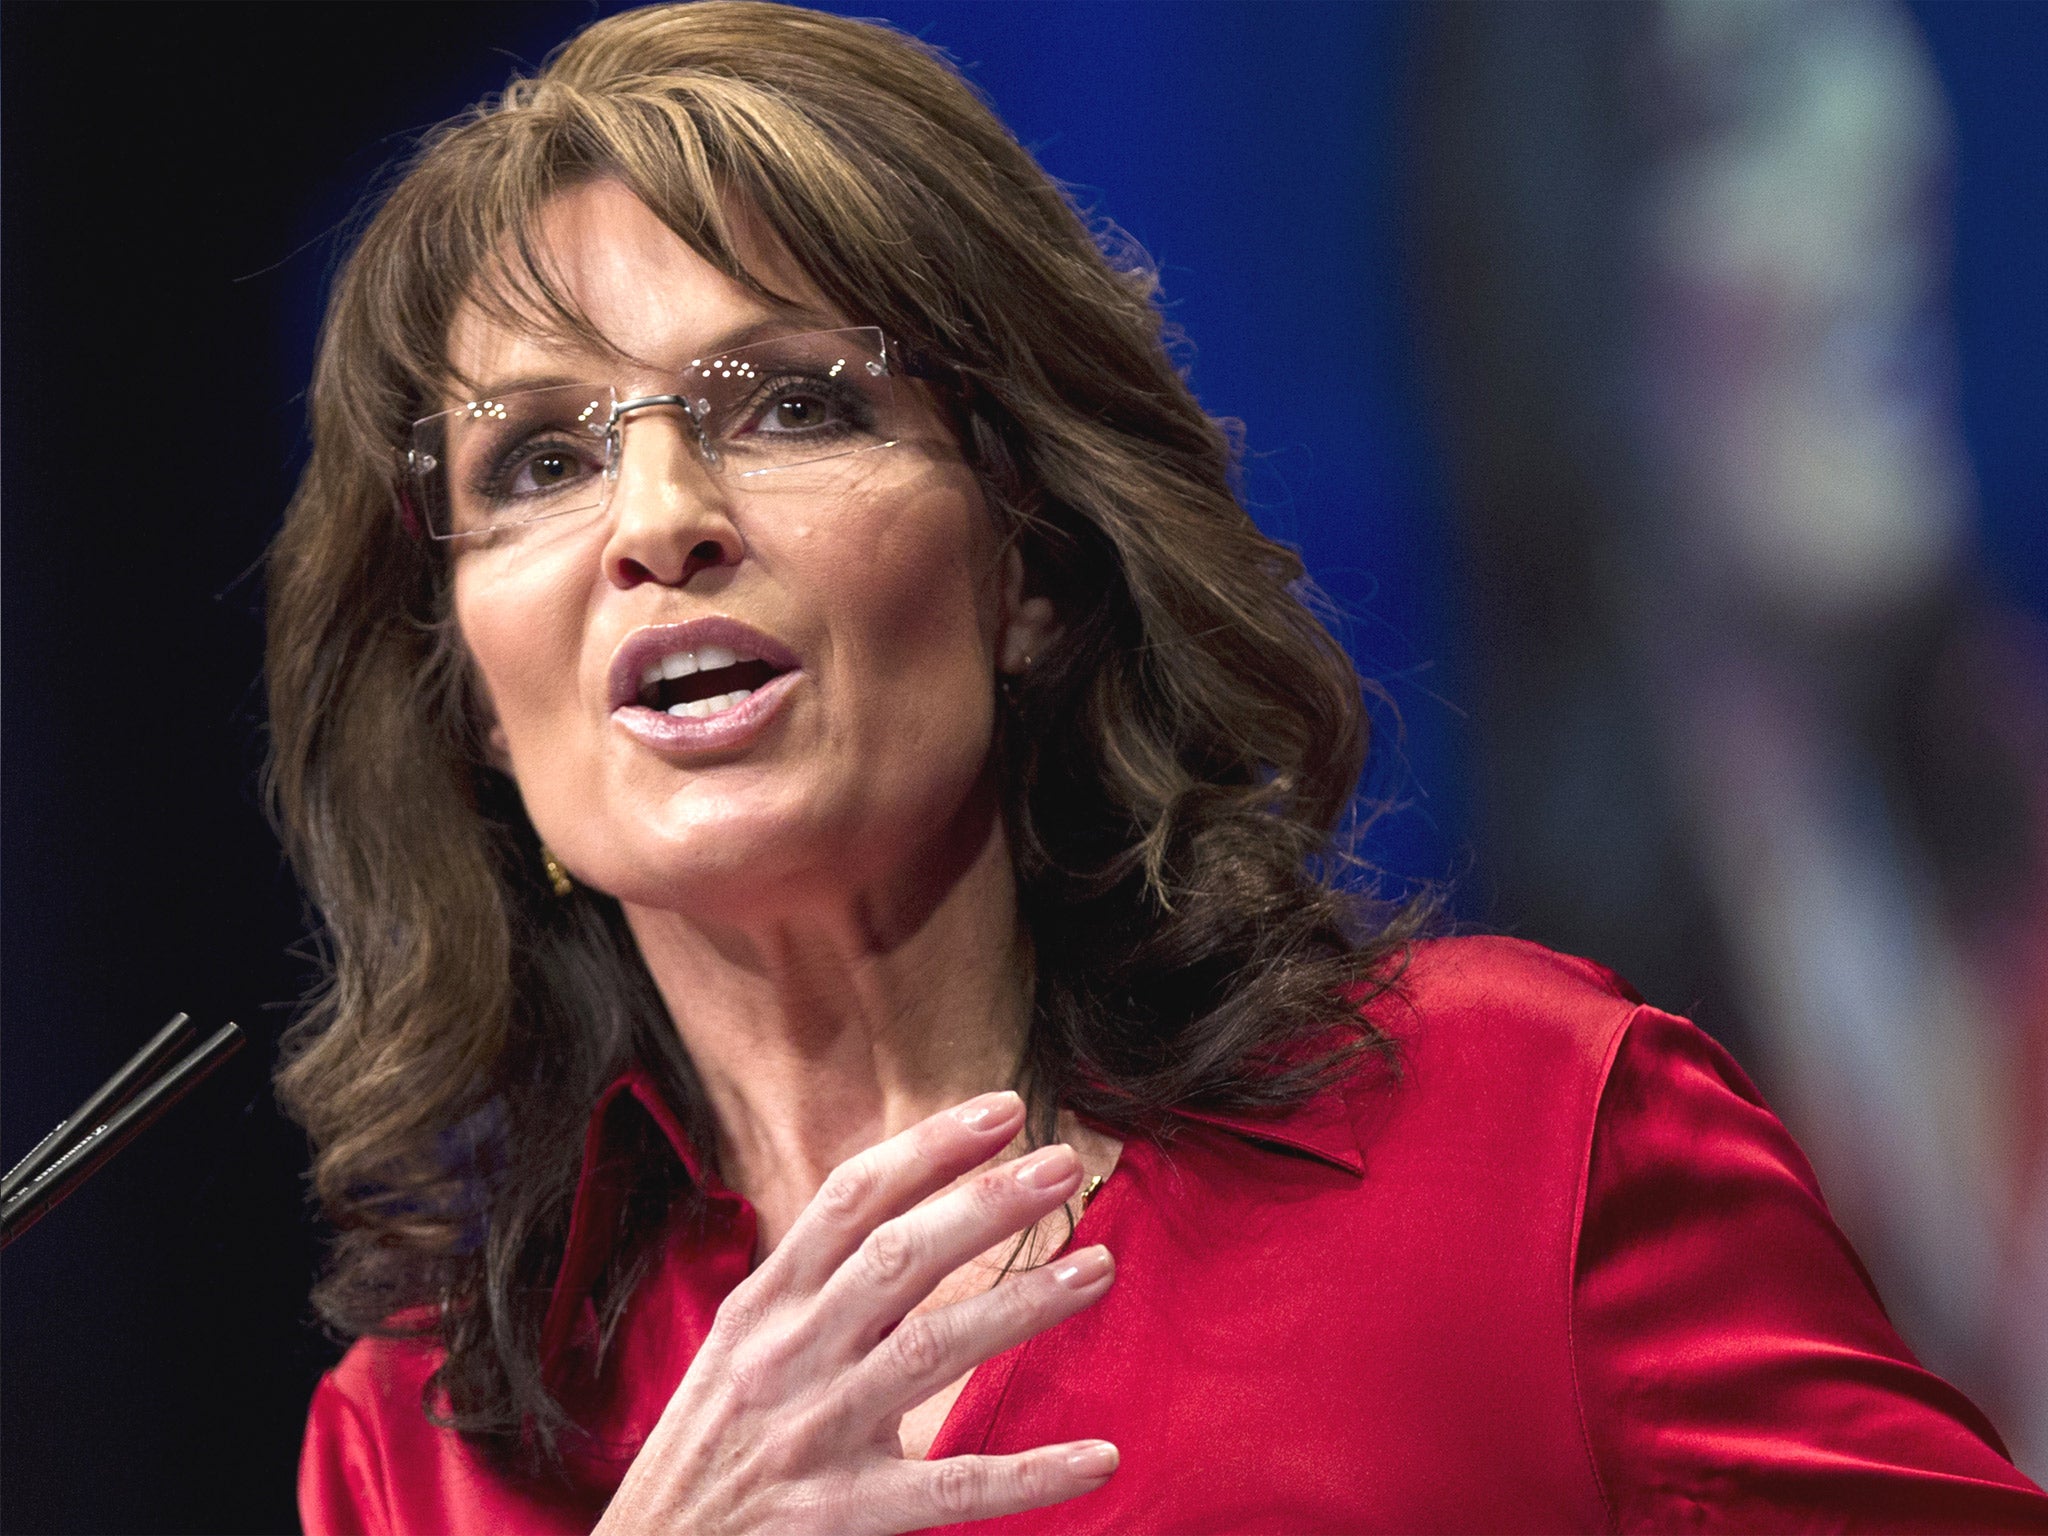 Palin is turning her attention to the over-commercialisation of Christmas